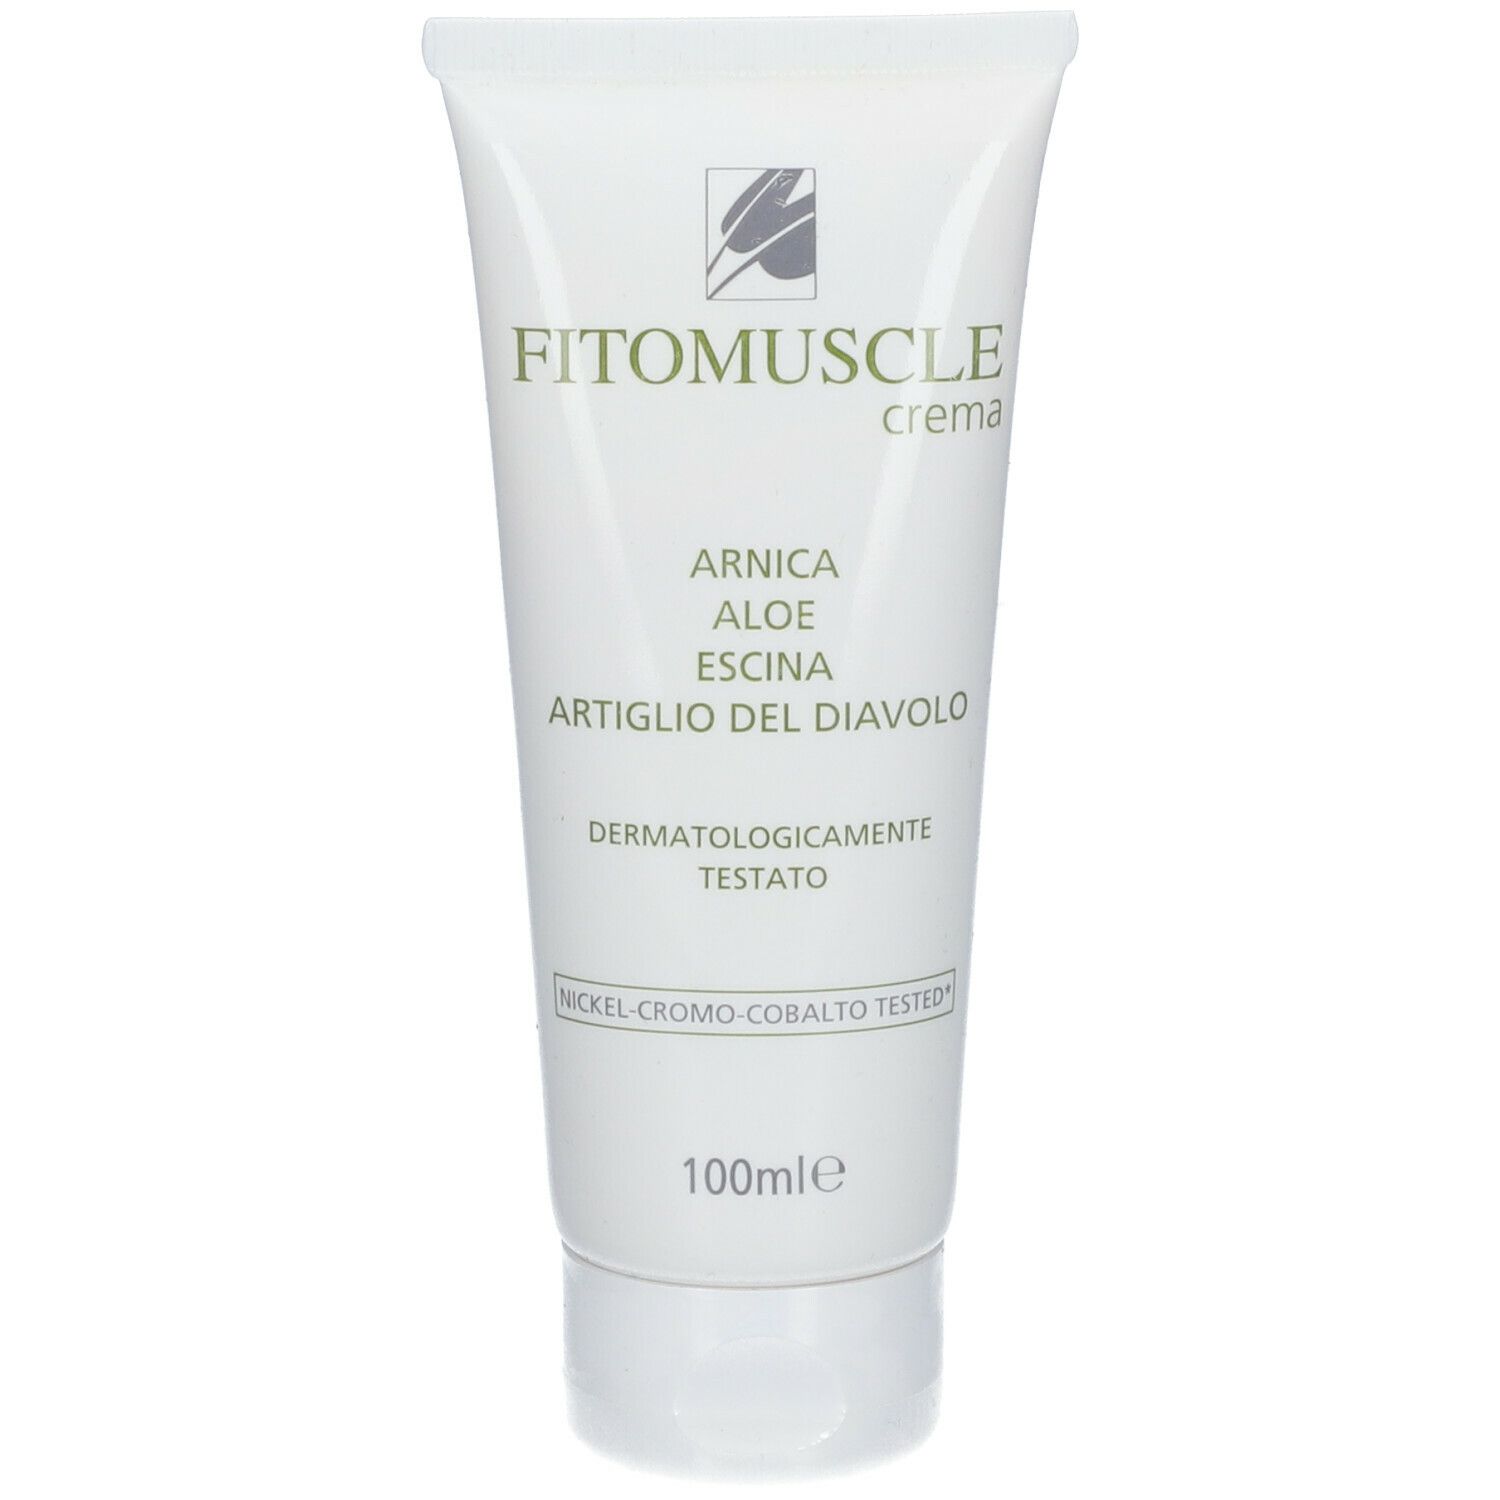 FOR FARMA Srl Fitomuscle Creme